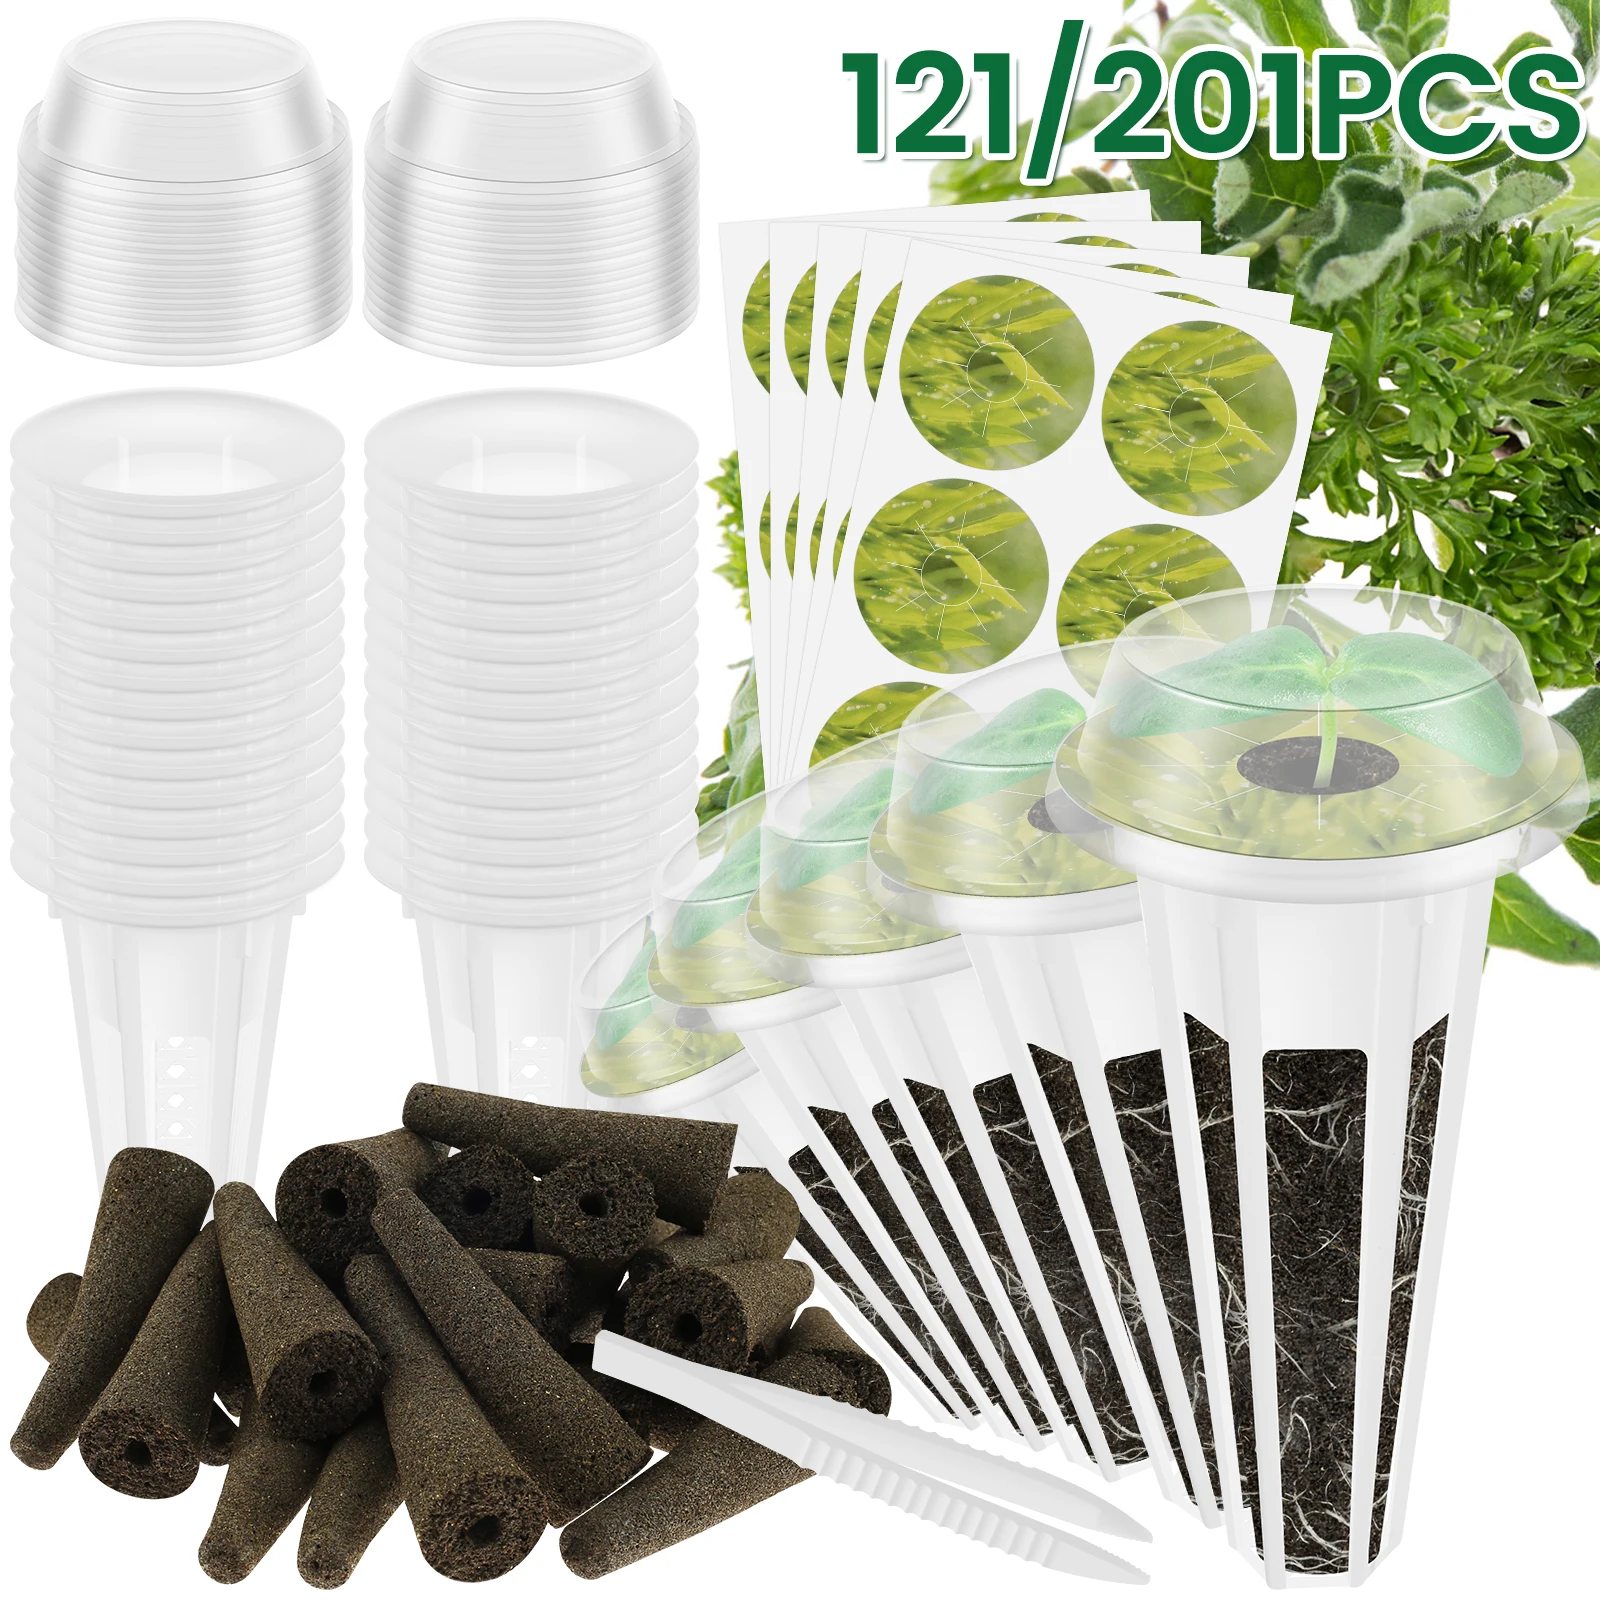 

121/201Pcs Seed Pod Kit for Hydroponics Growth Sponges Plant Seed Pods Kit with Grow Sponges Pod Labels Baskets Domes Reusable